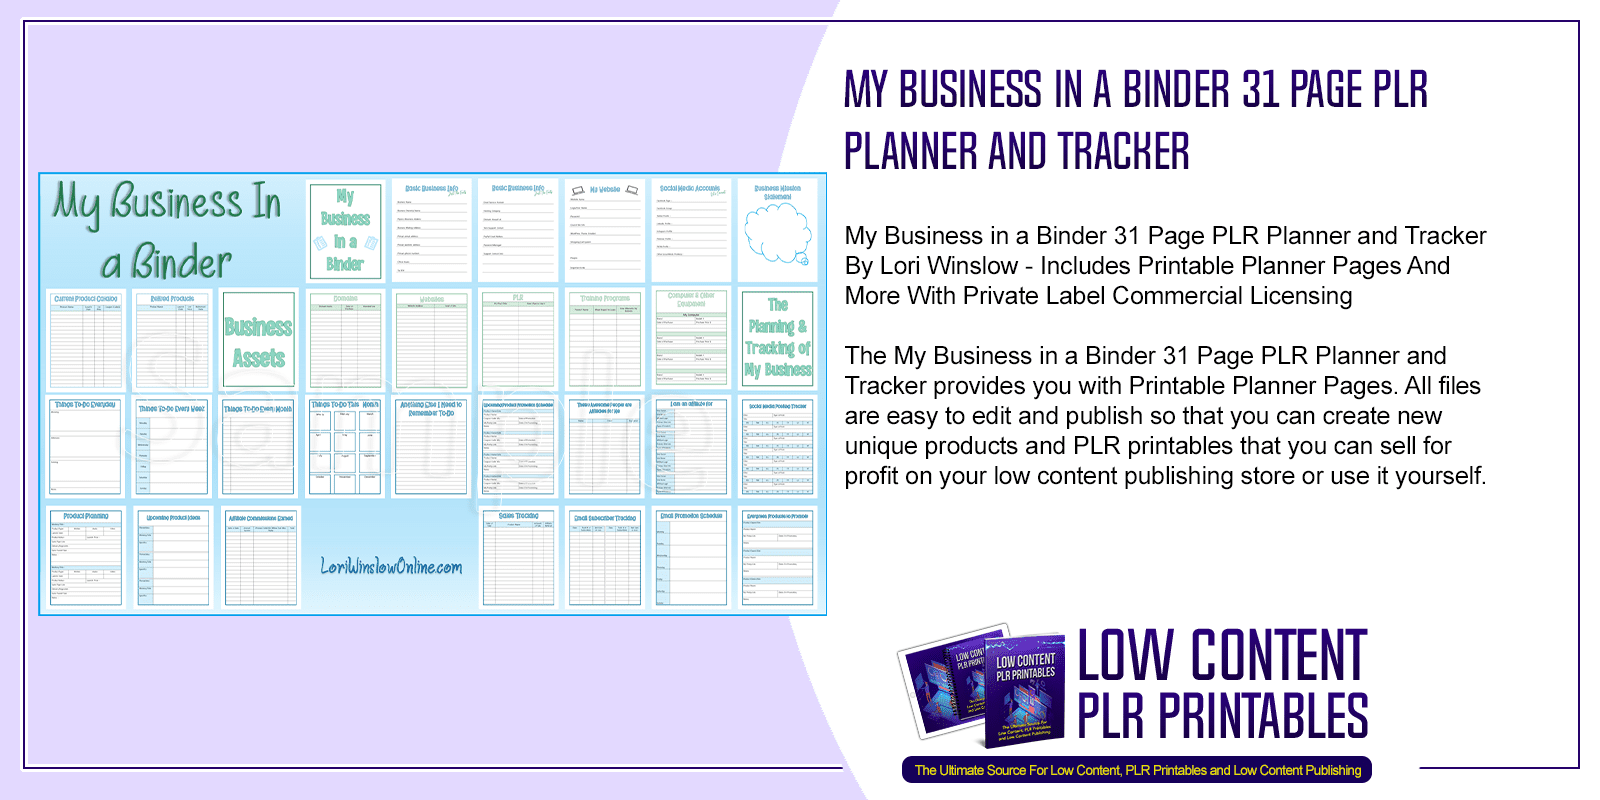 My Business in a Binder 31 Page PLR Planner and Tracker